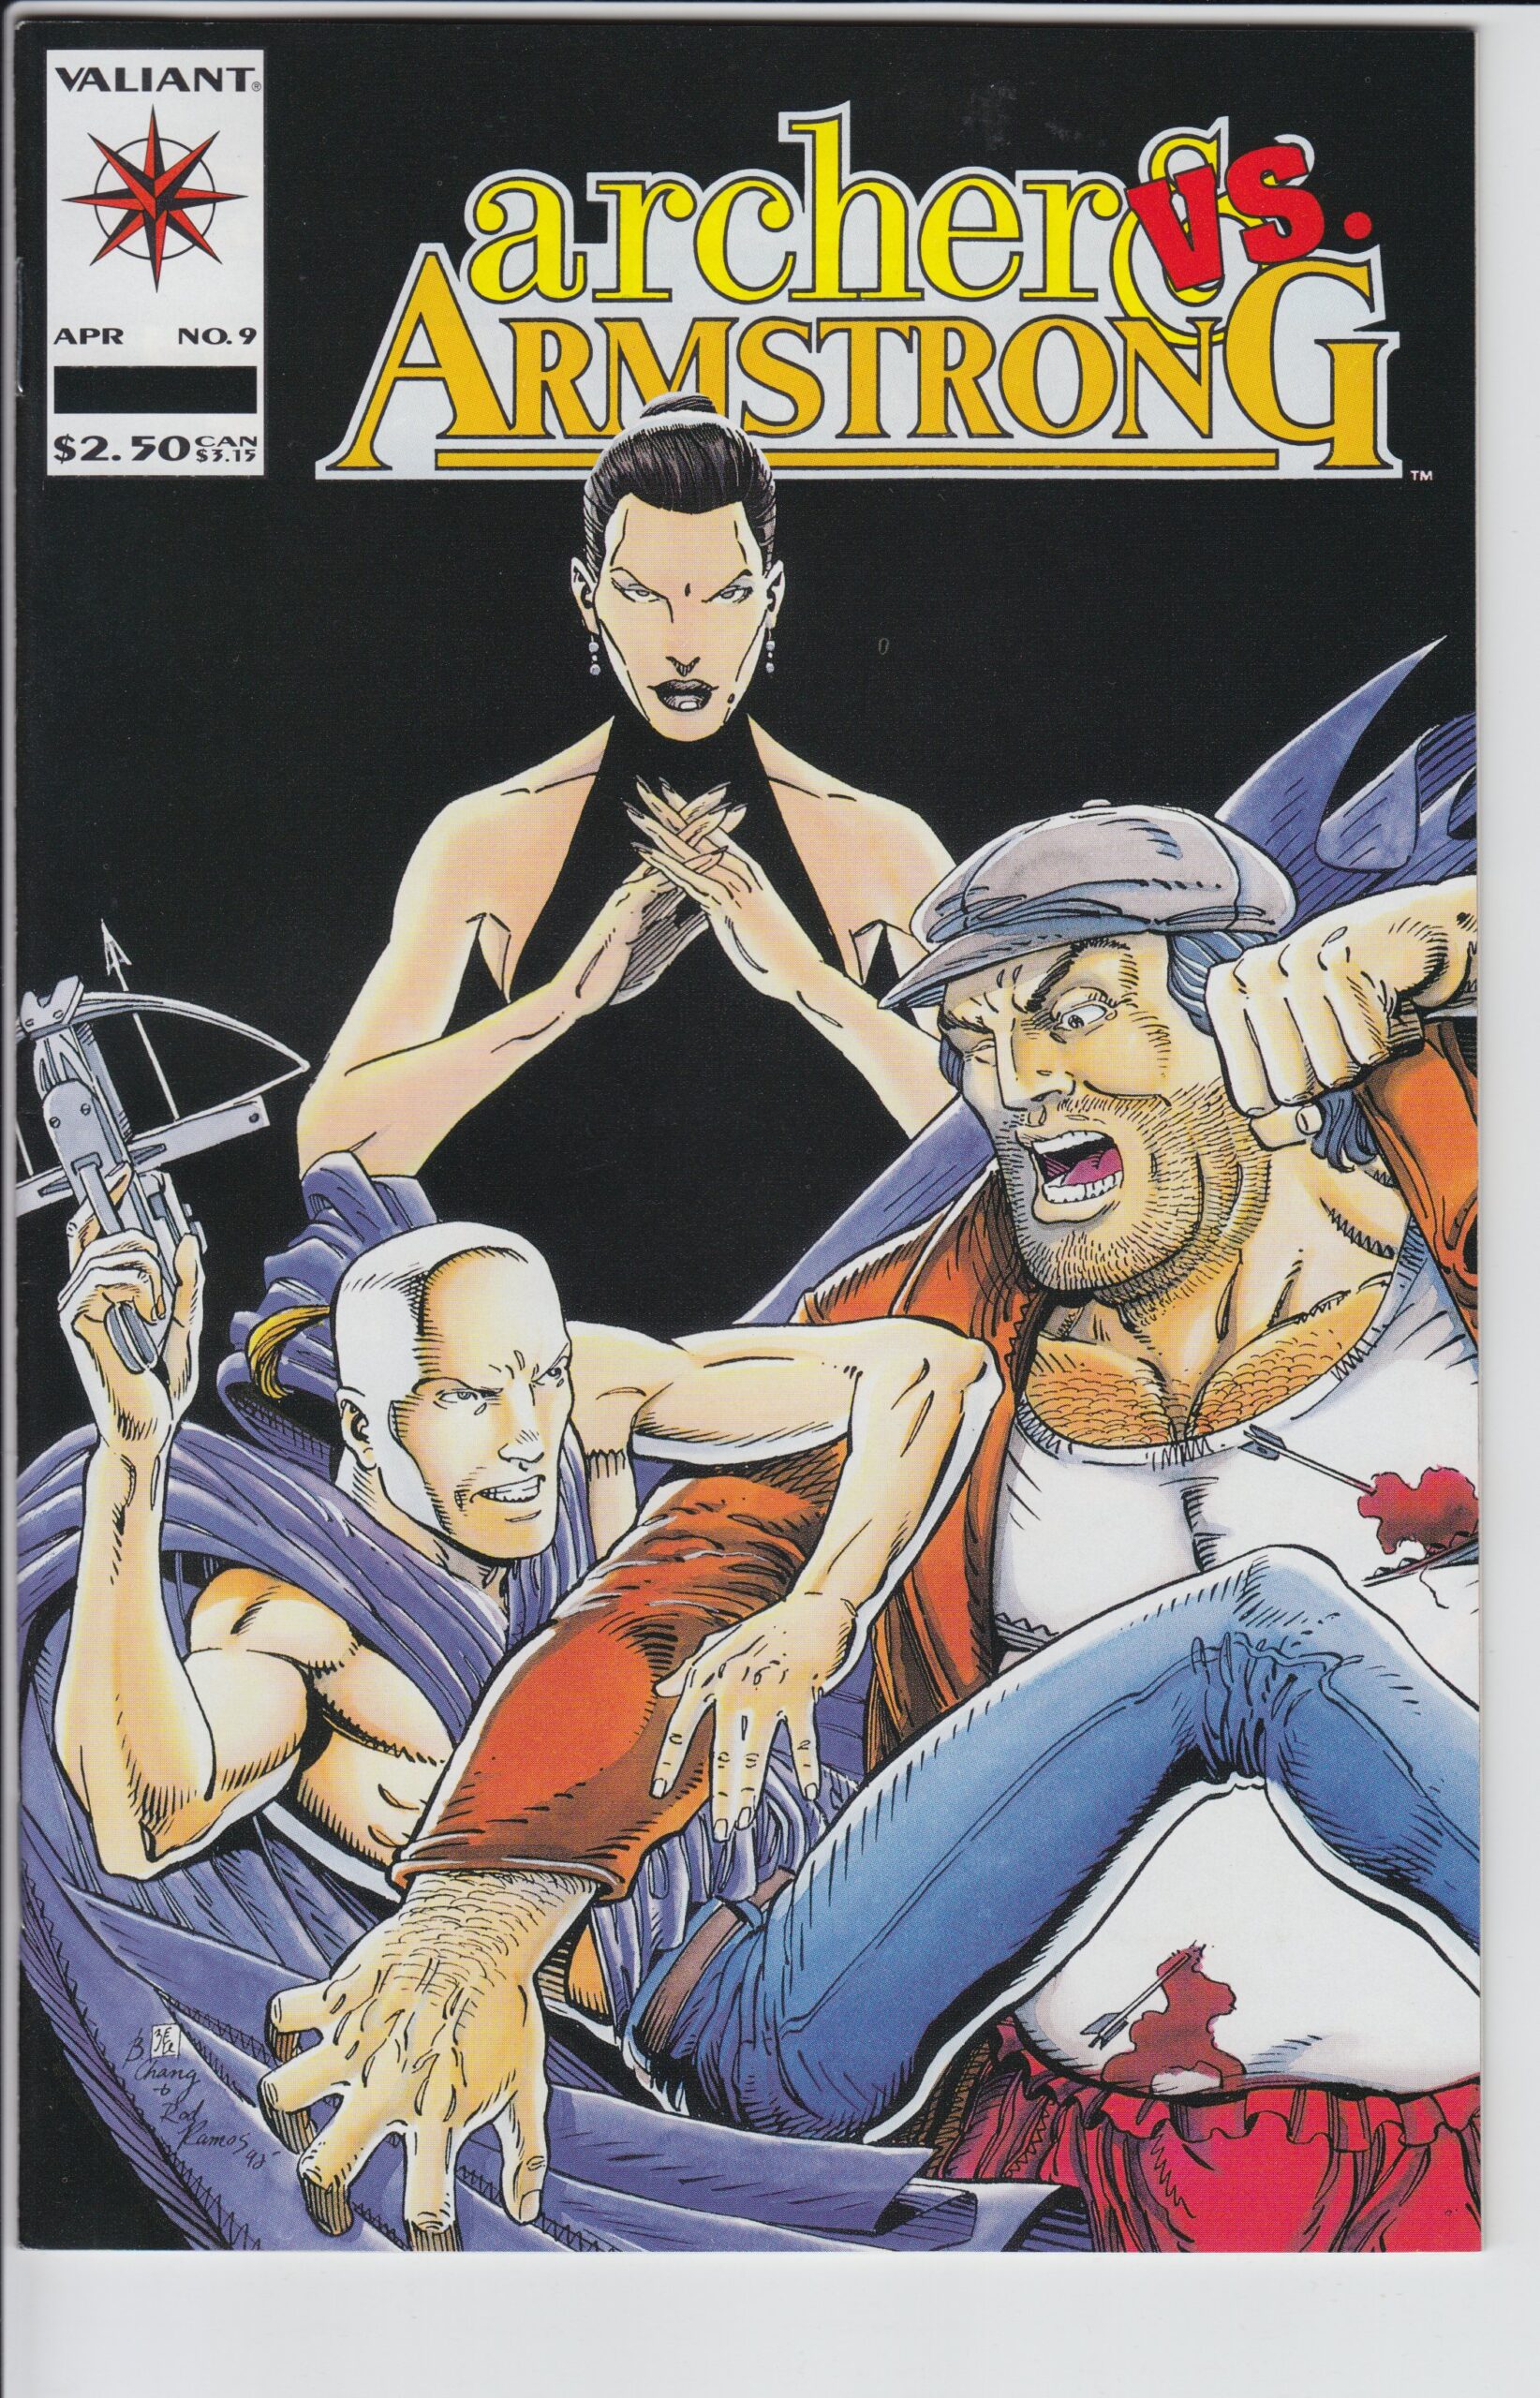 ARCHER & ARMSTRONG #9 (1993) NM, early Valiant.